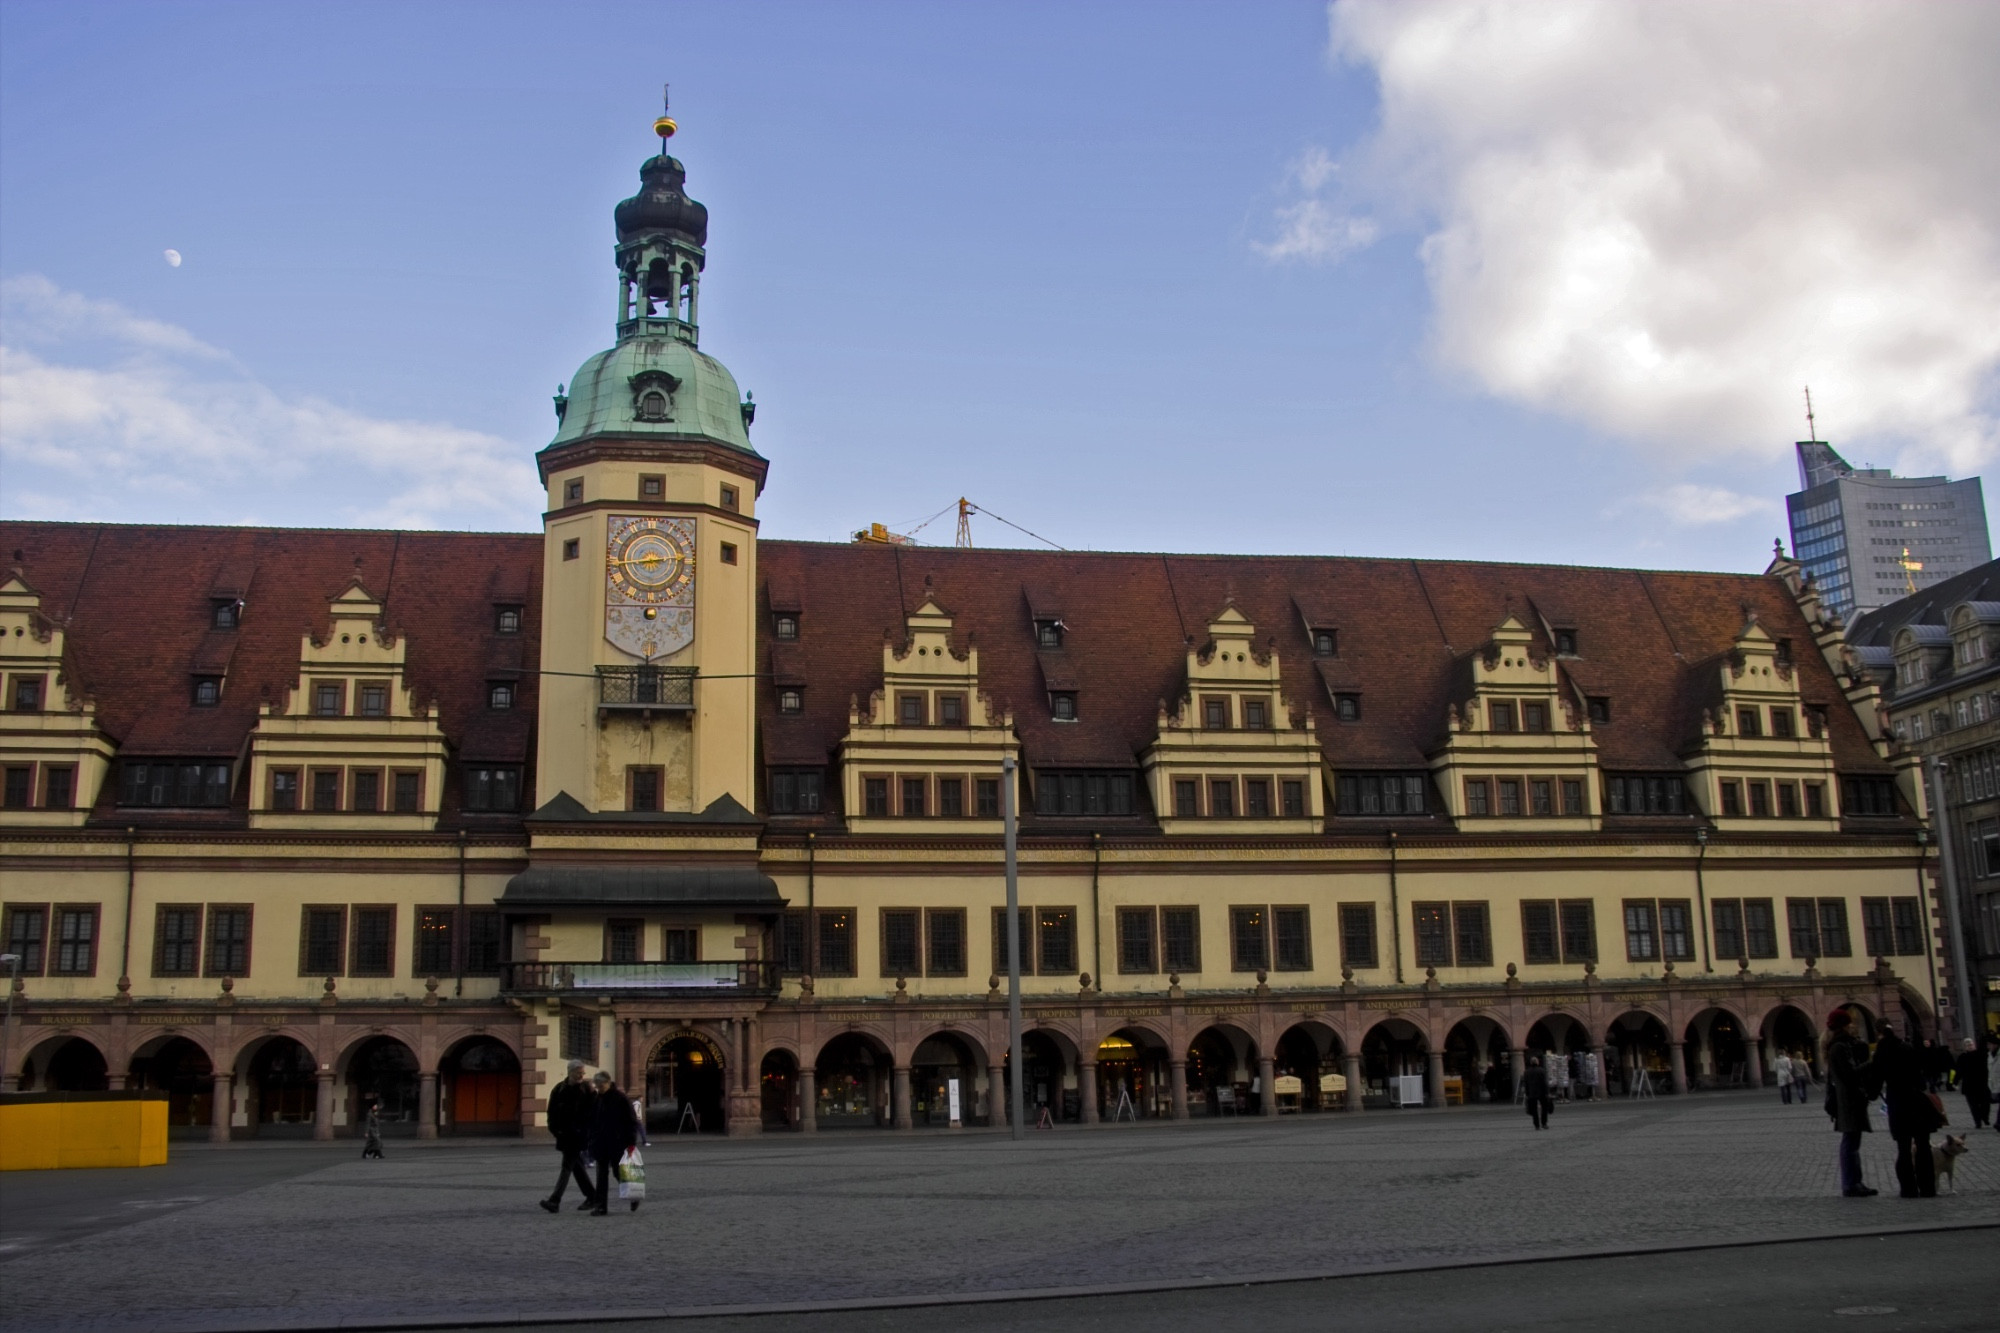 Town History Museum - Old Town Hall, Germany